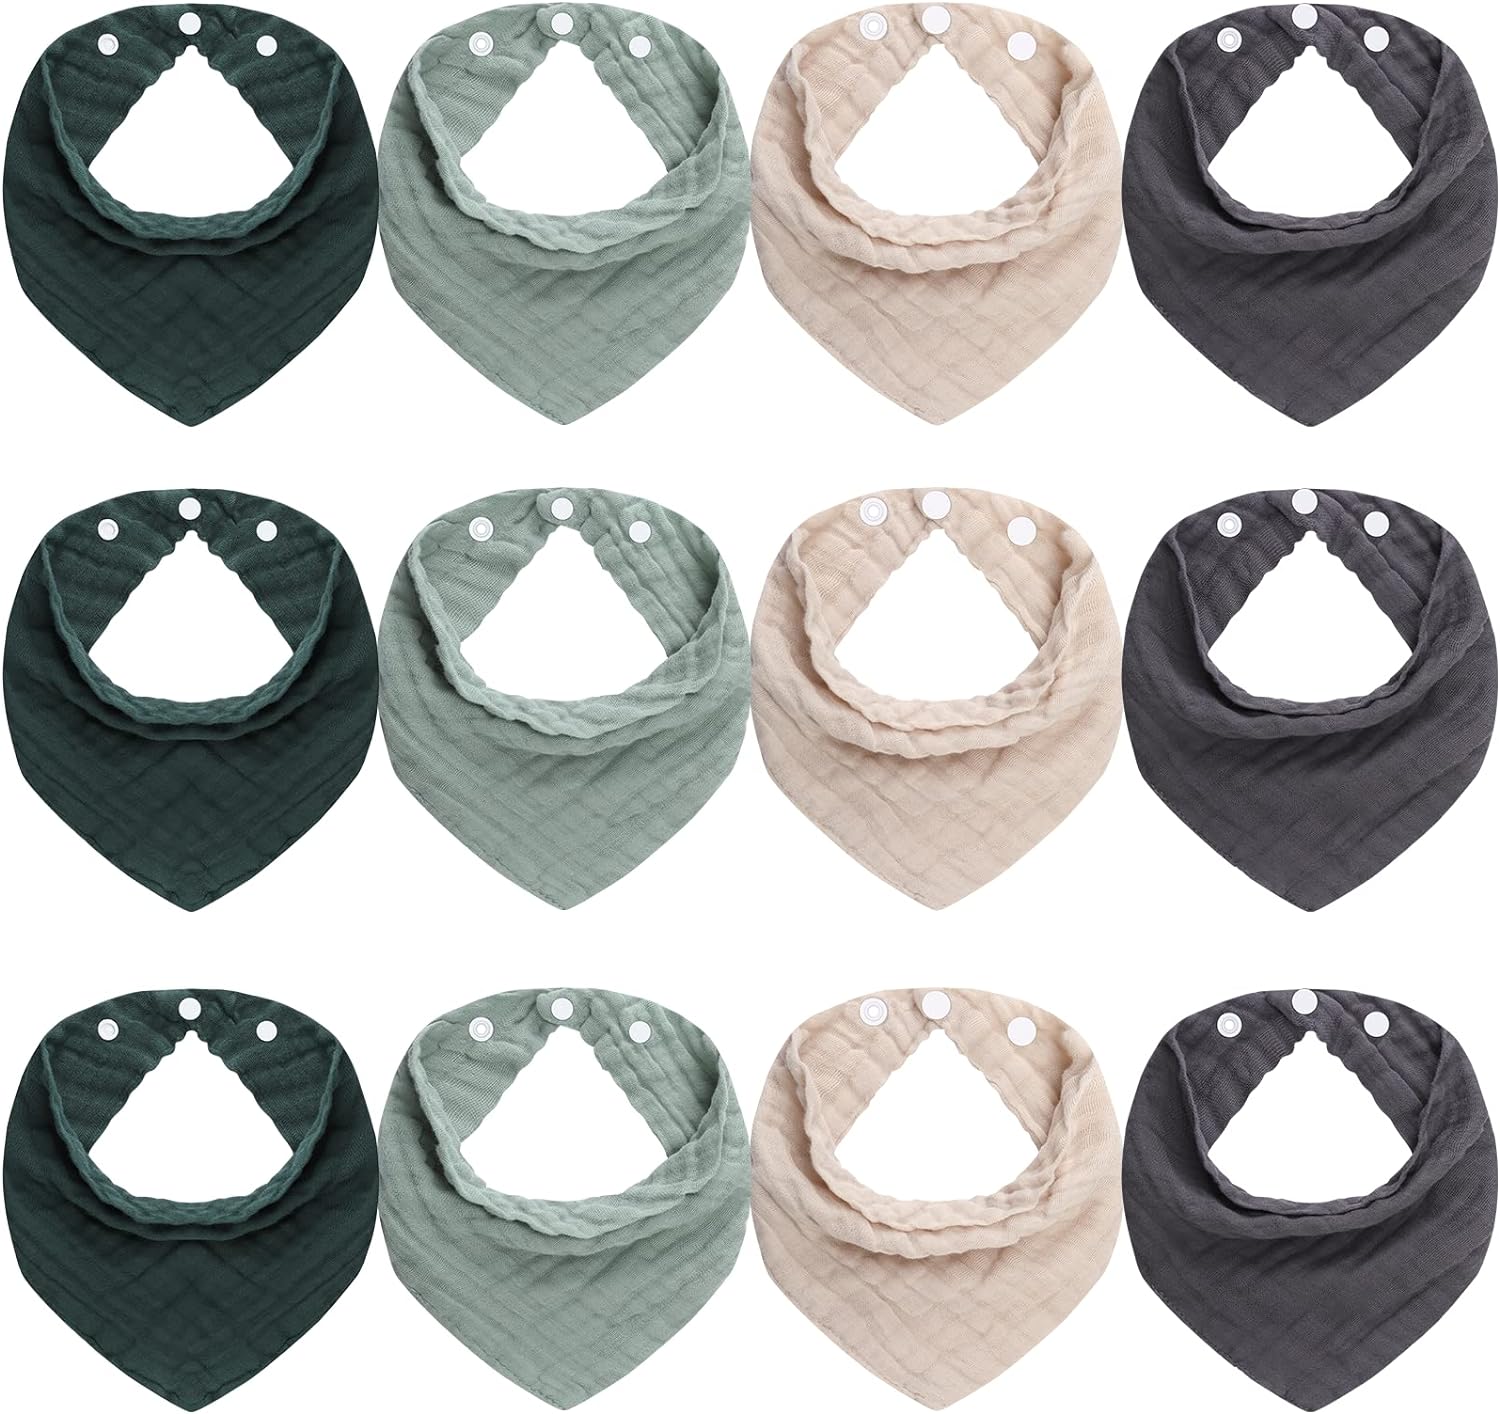 12-Pack Muslin Baby Drool Bibs 100% Cotton for Boys and Girls,Soft and Absorbent/Atrovirens/Green/Apricot white/Grey